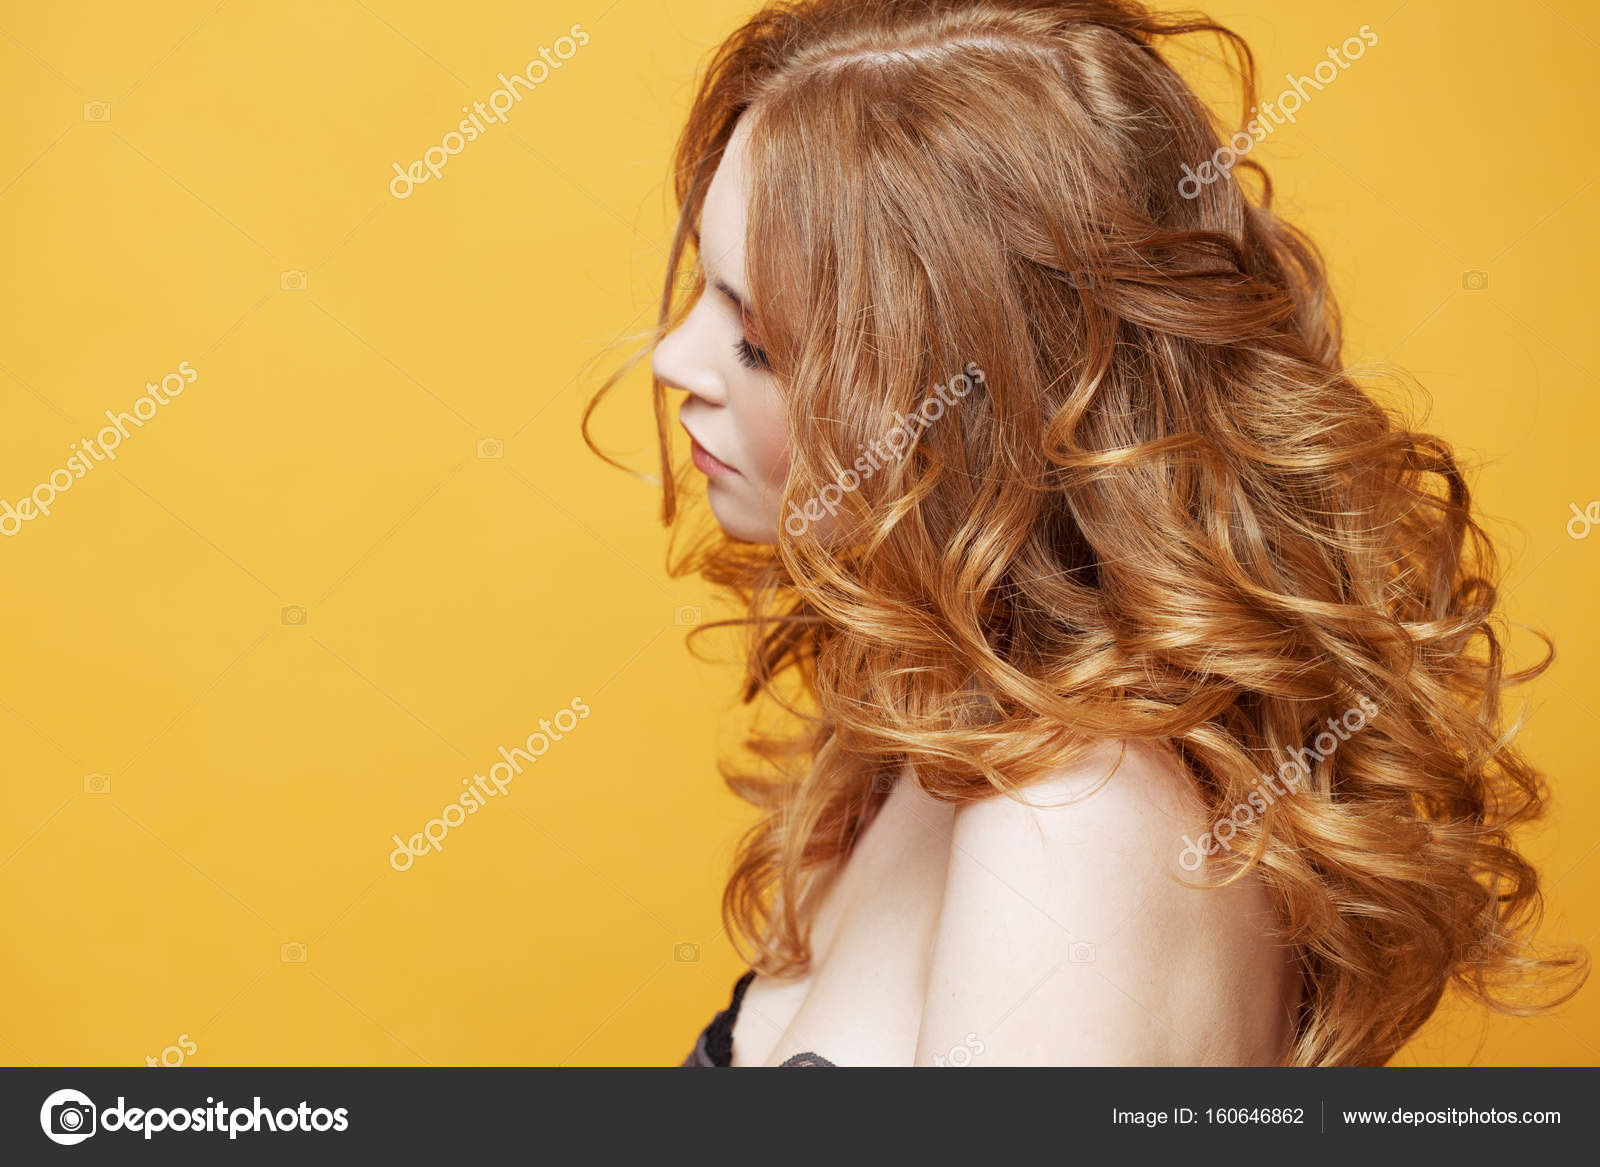 Beautiful redheaded girl with luxurious curly hair. Portrait in profile.  Free space left. Studio portrait on yellow background. Stock Photo by  ©KrisCole 160646862